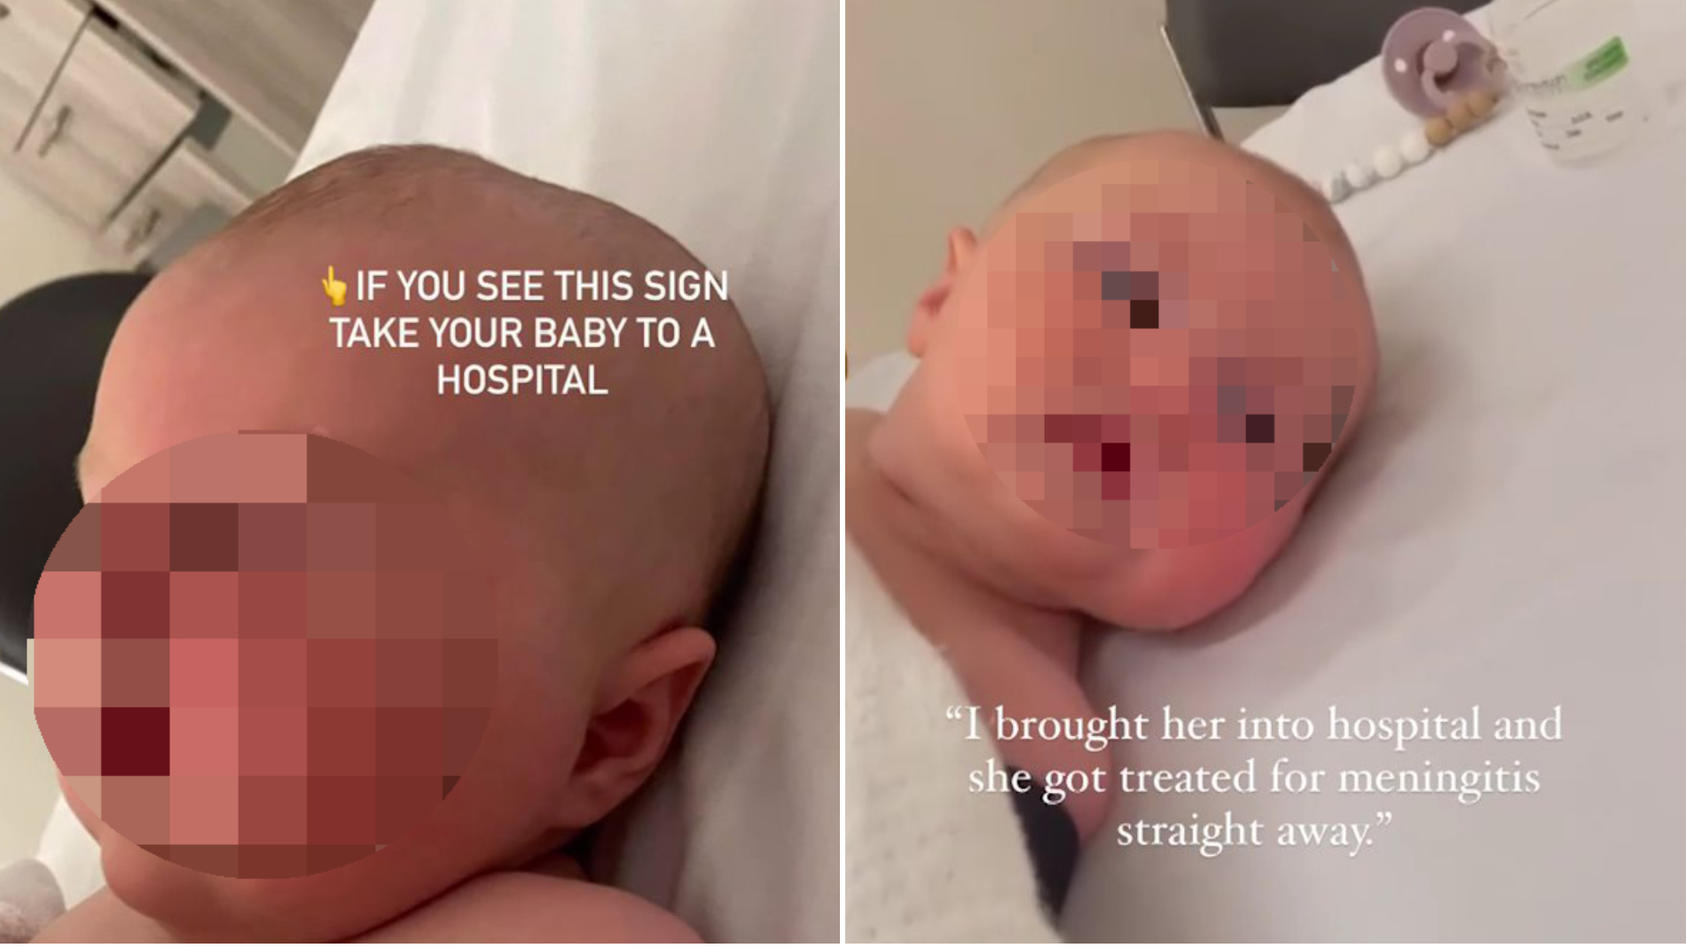 A strange bump on the baby's head turns out to be meningitis